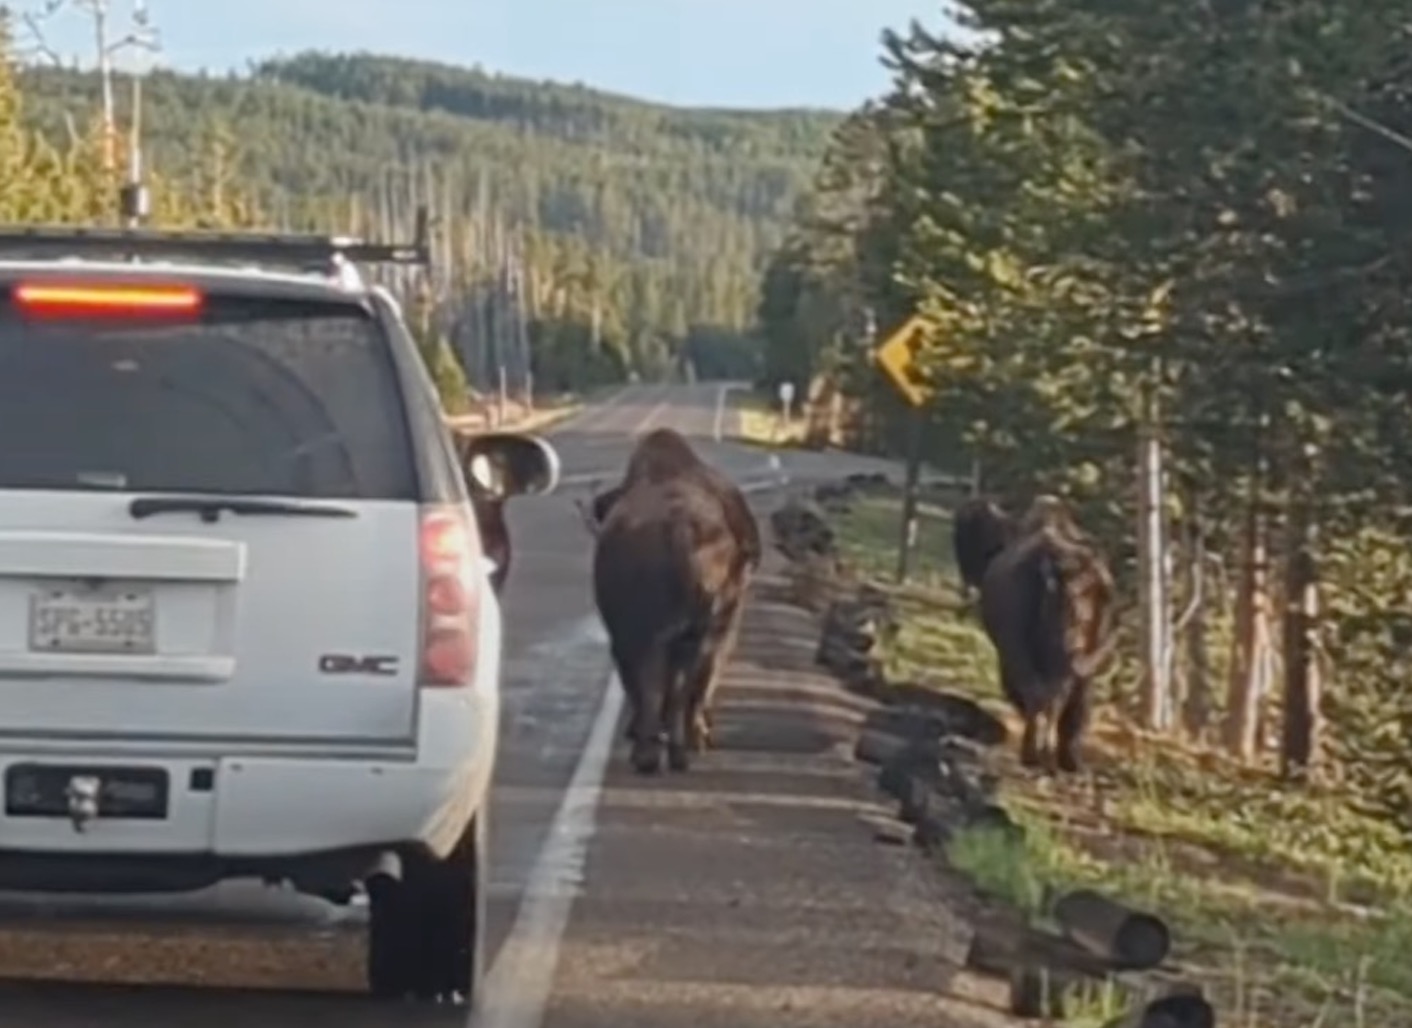 Impatient SUV Driver Forces Yellowstone Bison Off Road